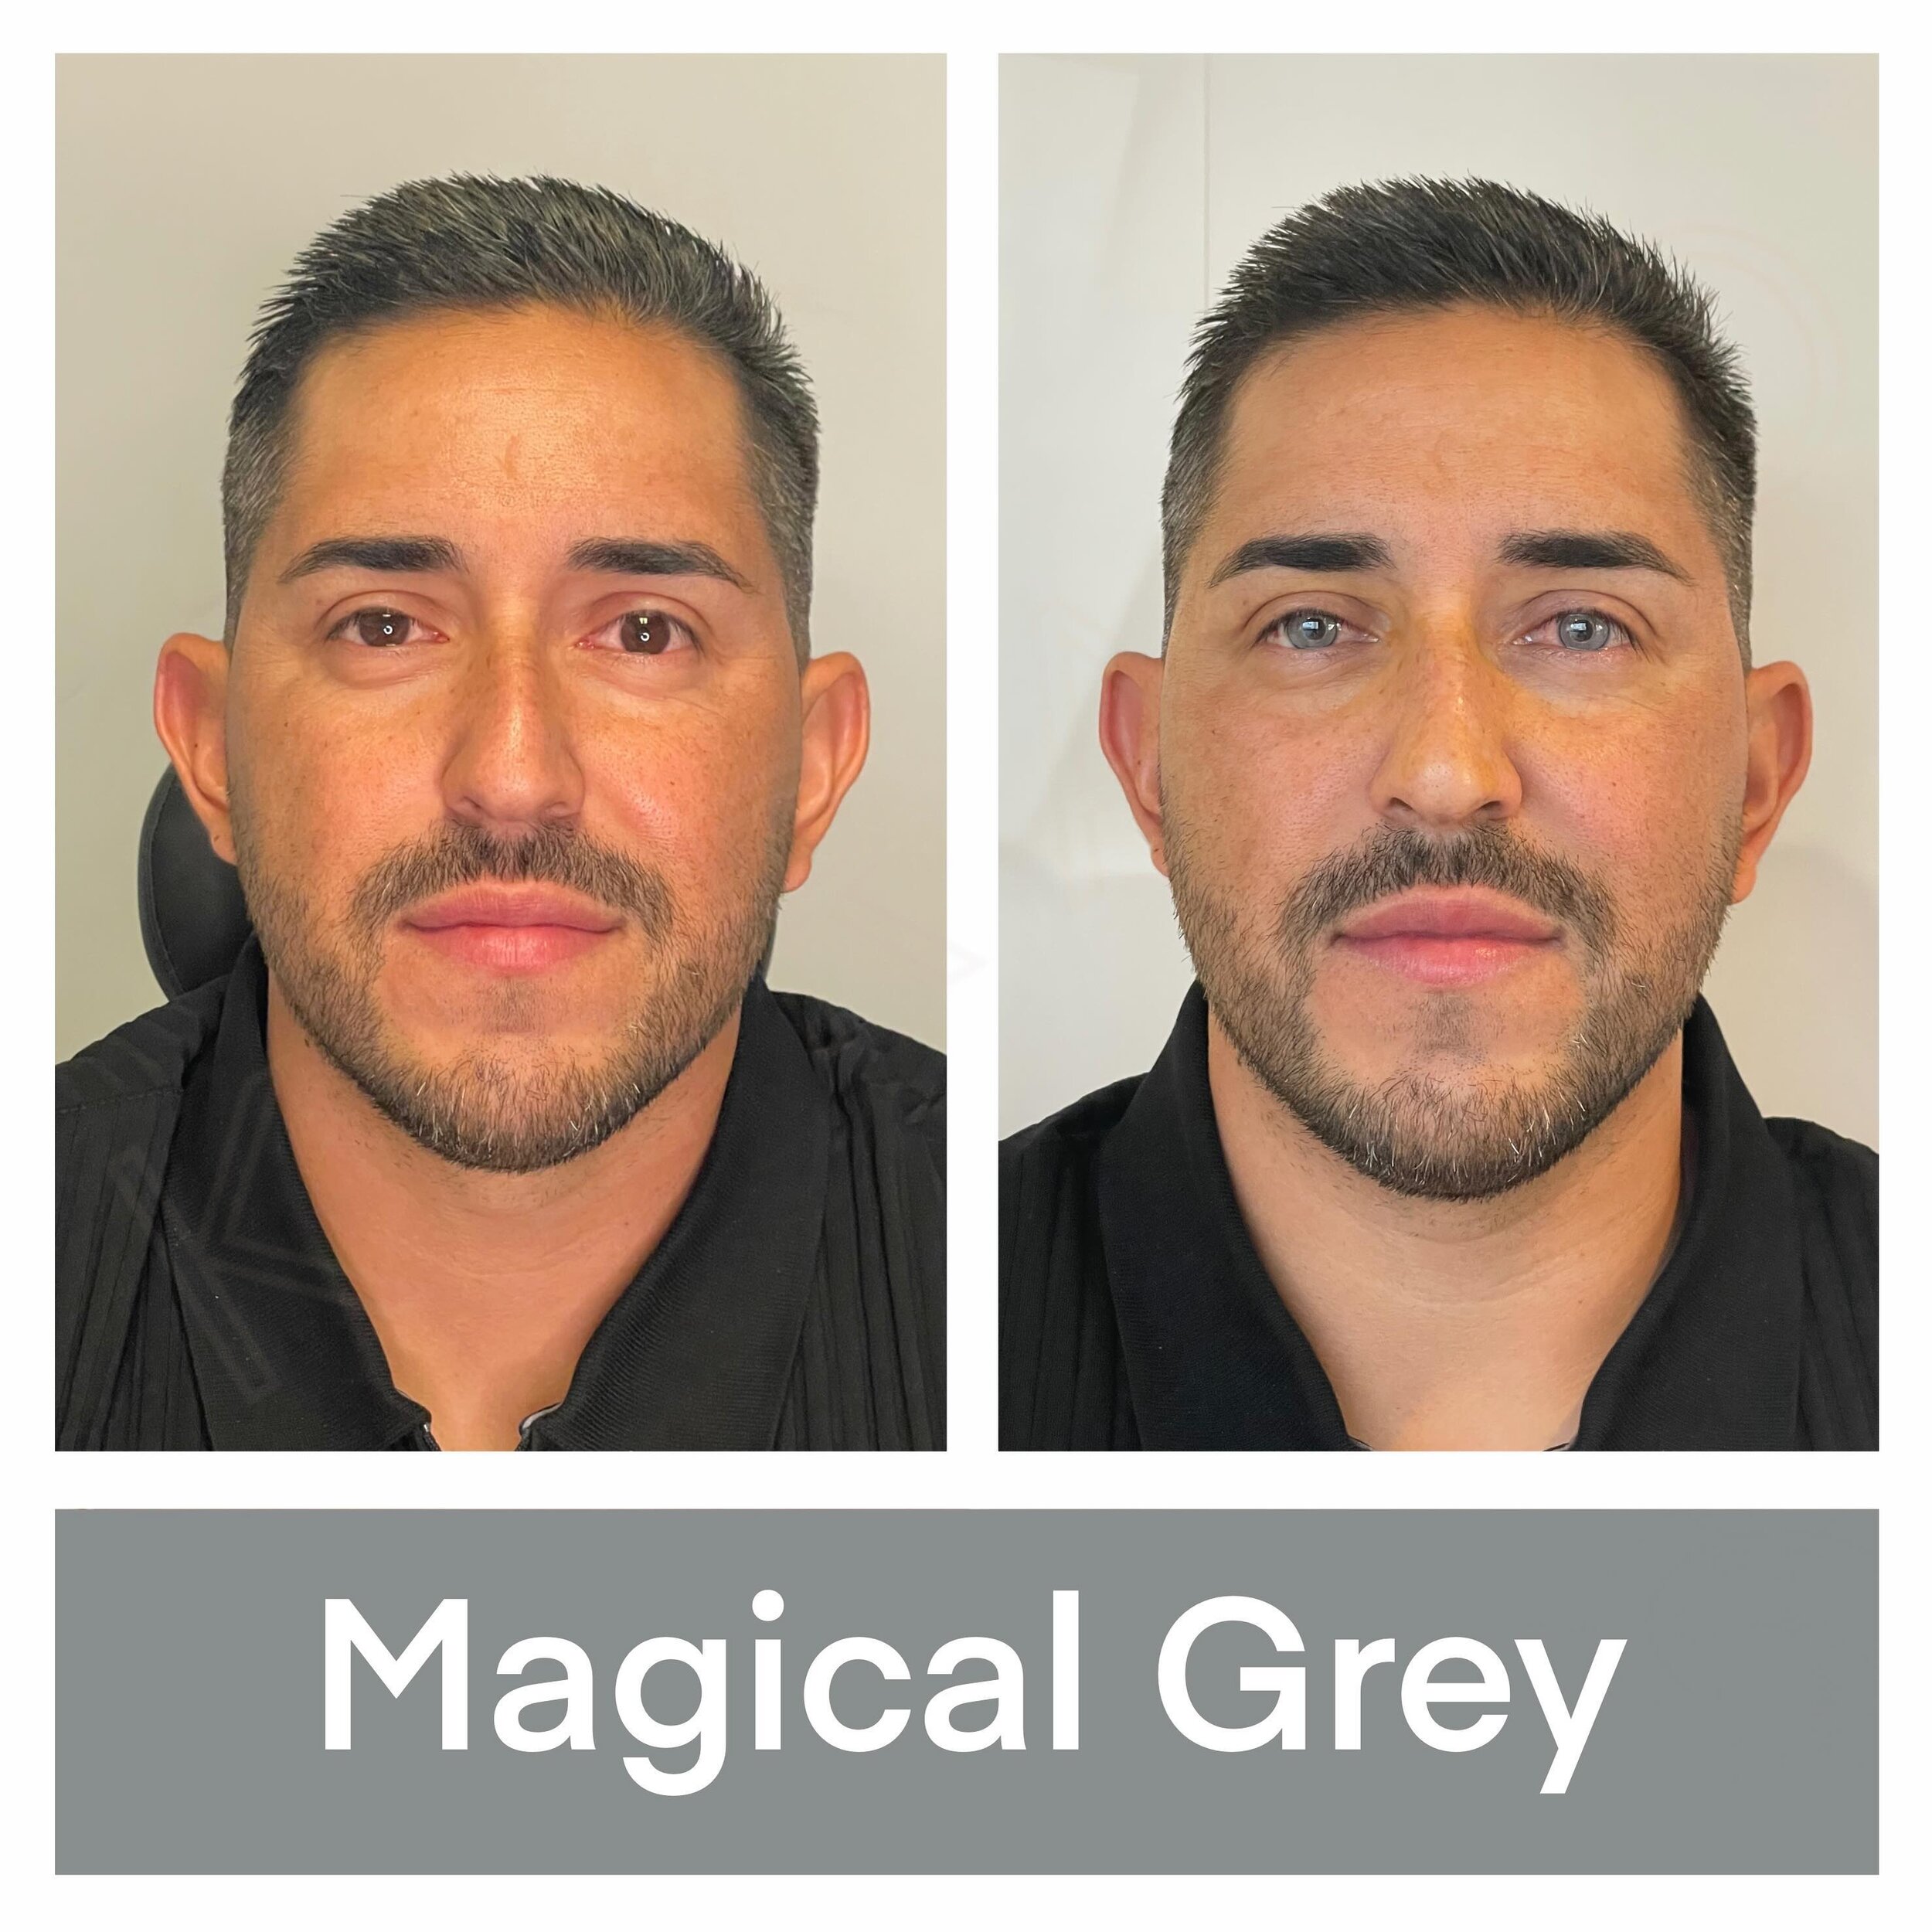 With the safe and precise procedure offered by Kerato NYC, our handsome patient now rocks a striking new look that perfectly complements his style. Say hello to the new you with Kerato NYC! #EyeTransformation #KeratopigmentationSuccess #NewEyesNewYou